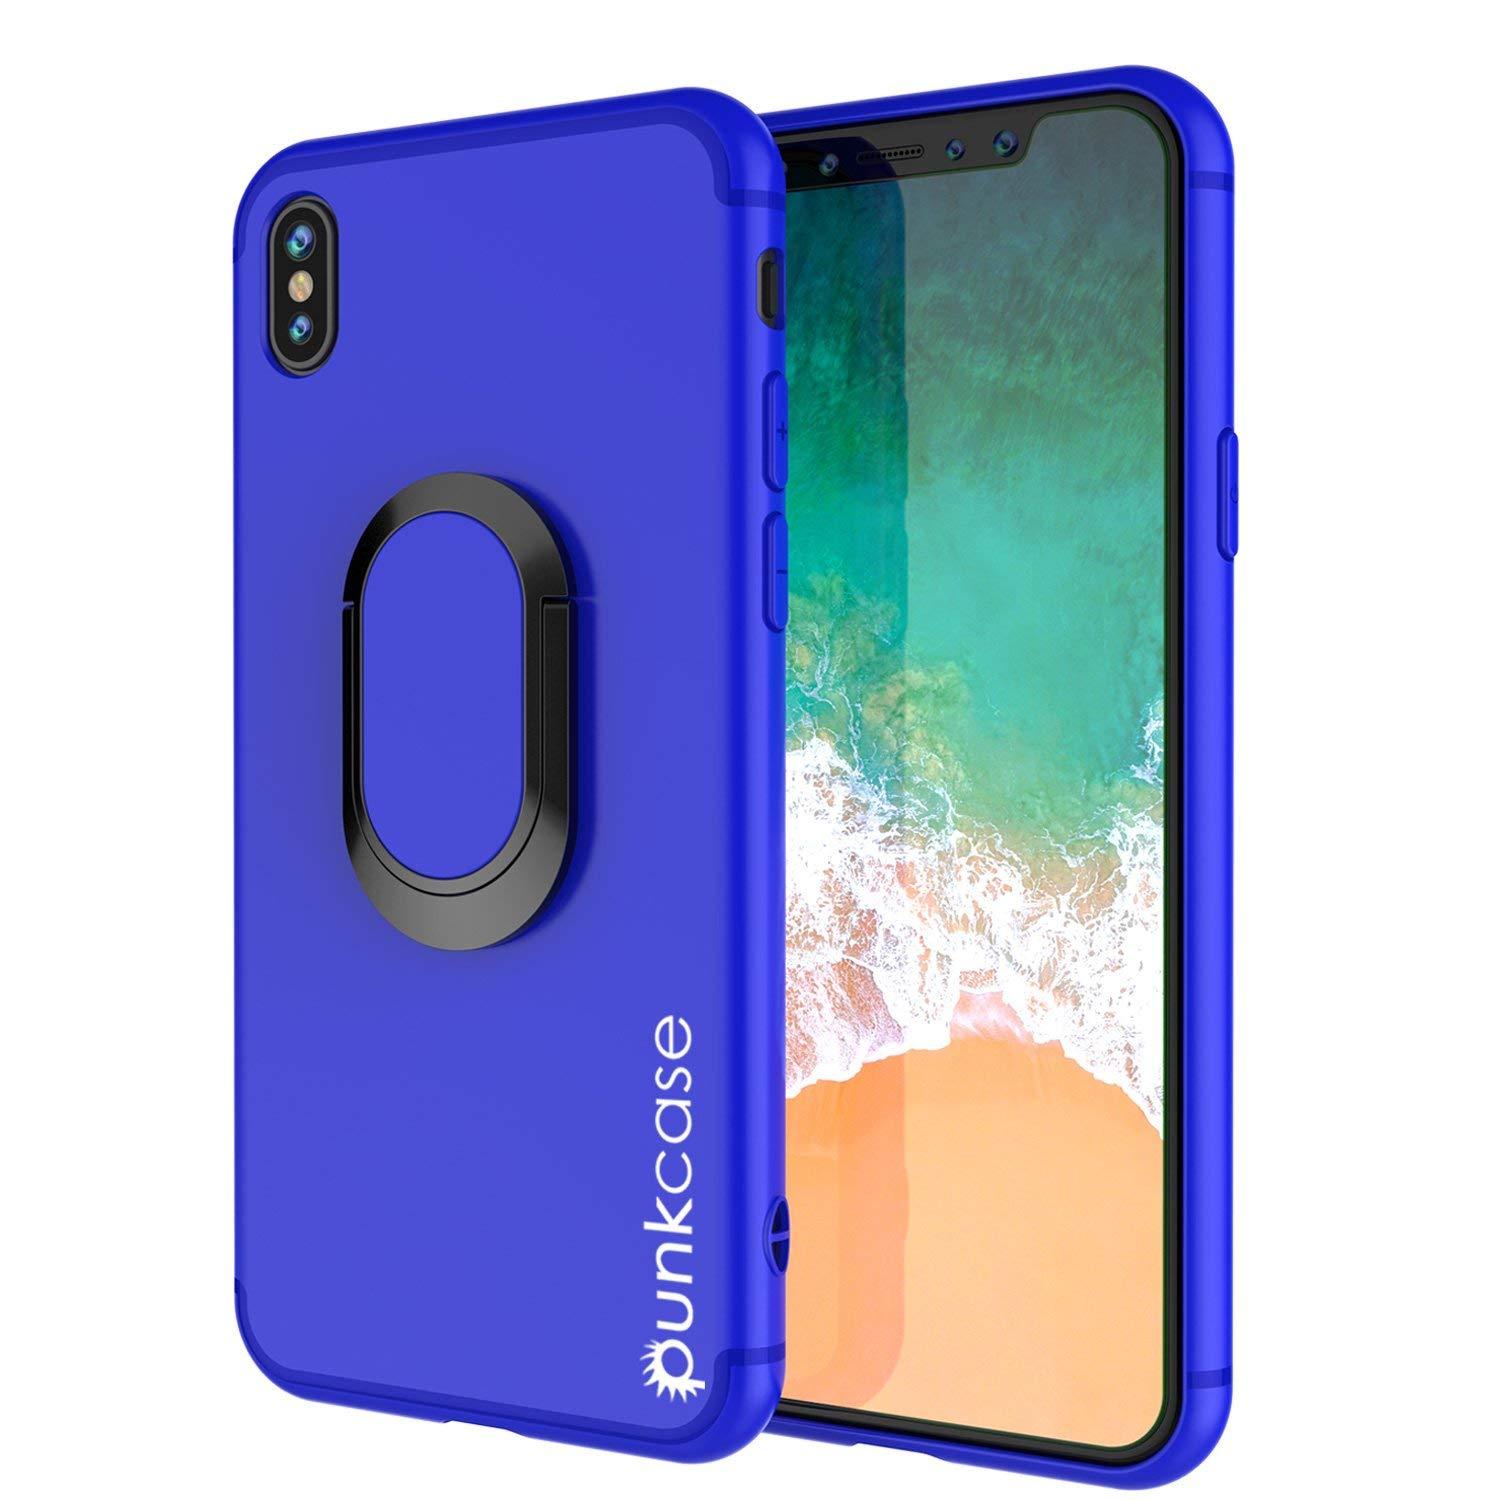 iPhone XR Case, Punkcase Magnetix Protective TPU Cover W/ Kickstand, Tempered Glass Screen Protector [Blue] (Color in image: blue)